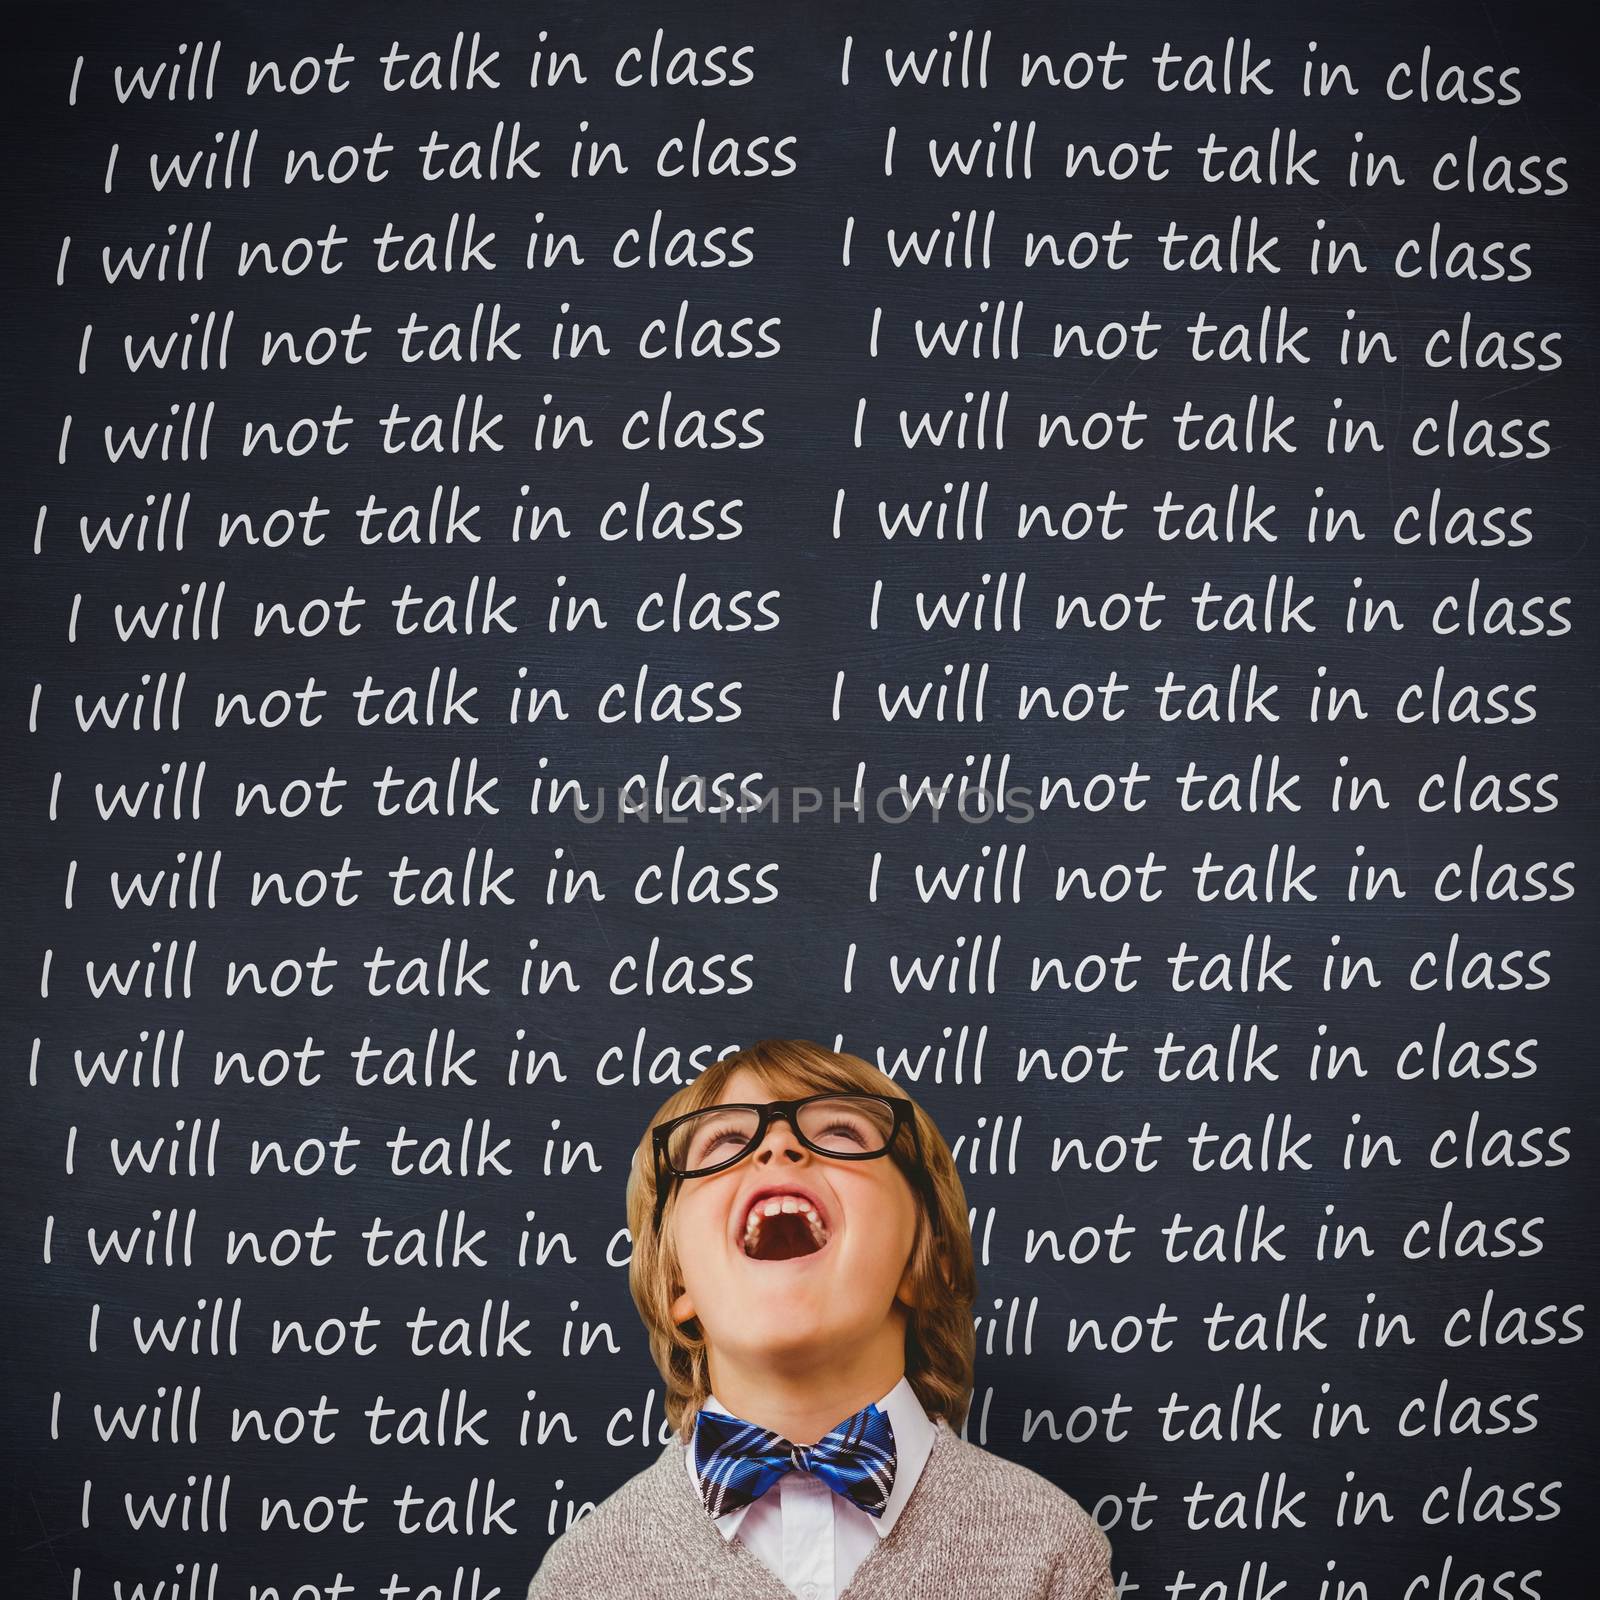 Composite image of cute pupil dressed up as teacher by Wavebreakmedia